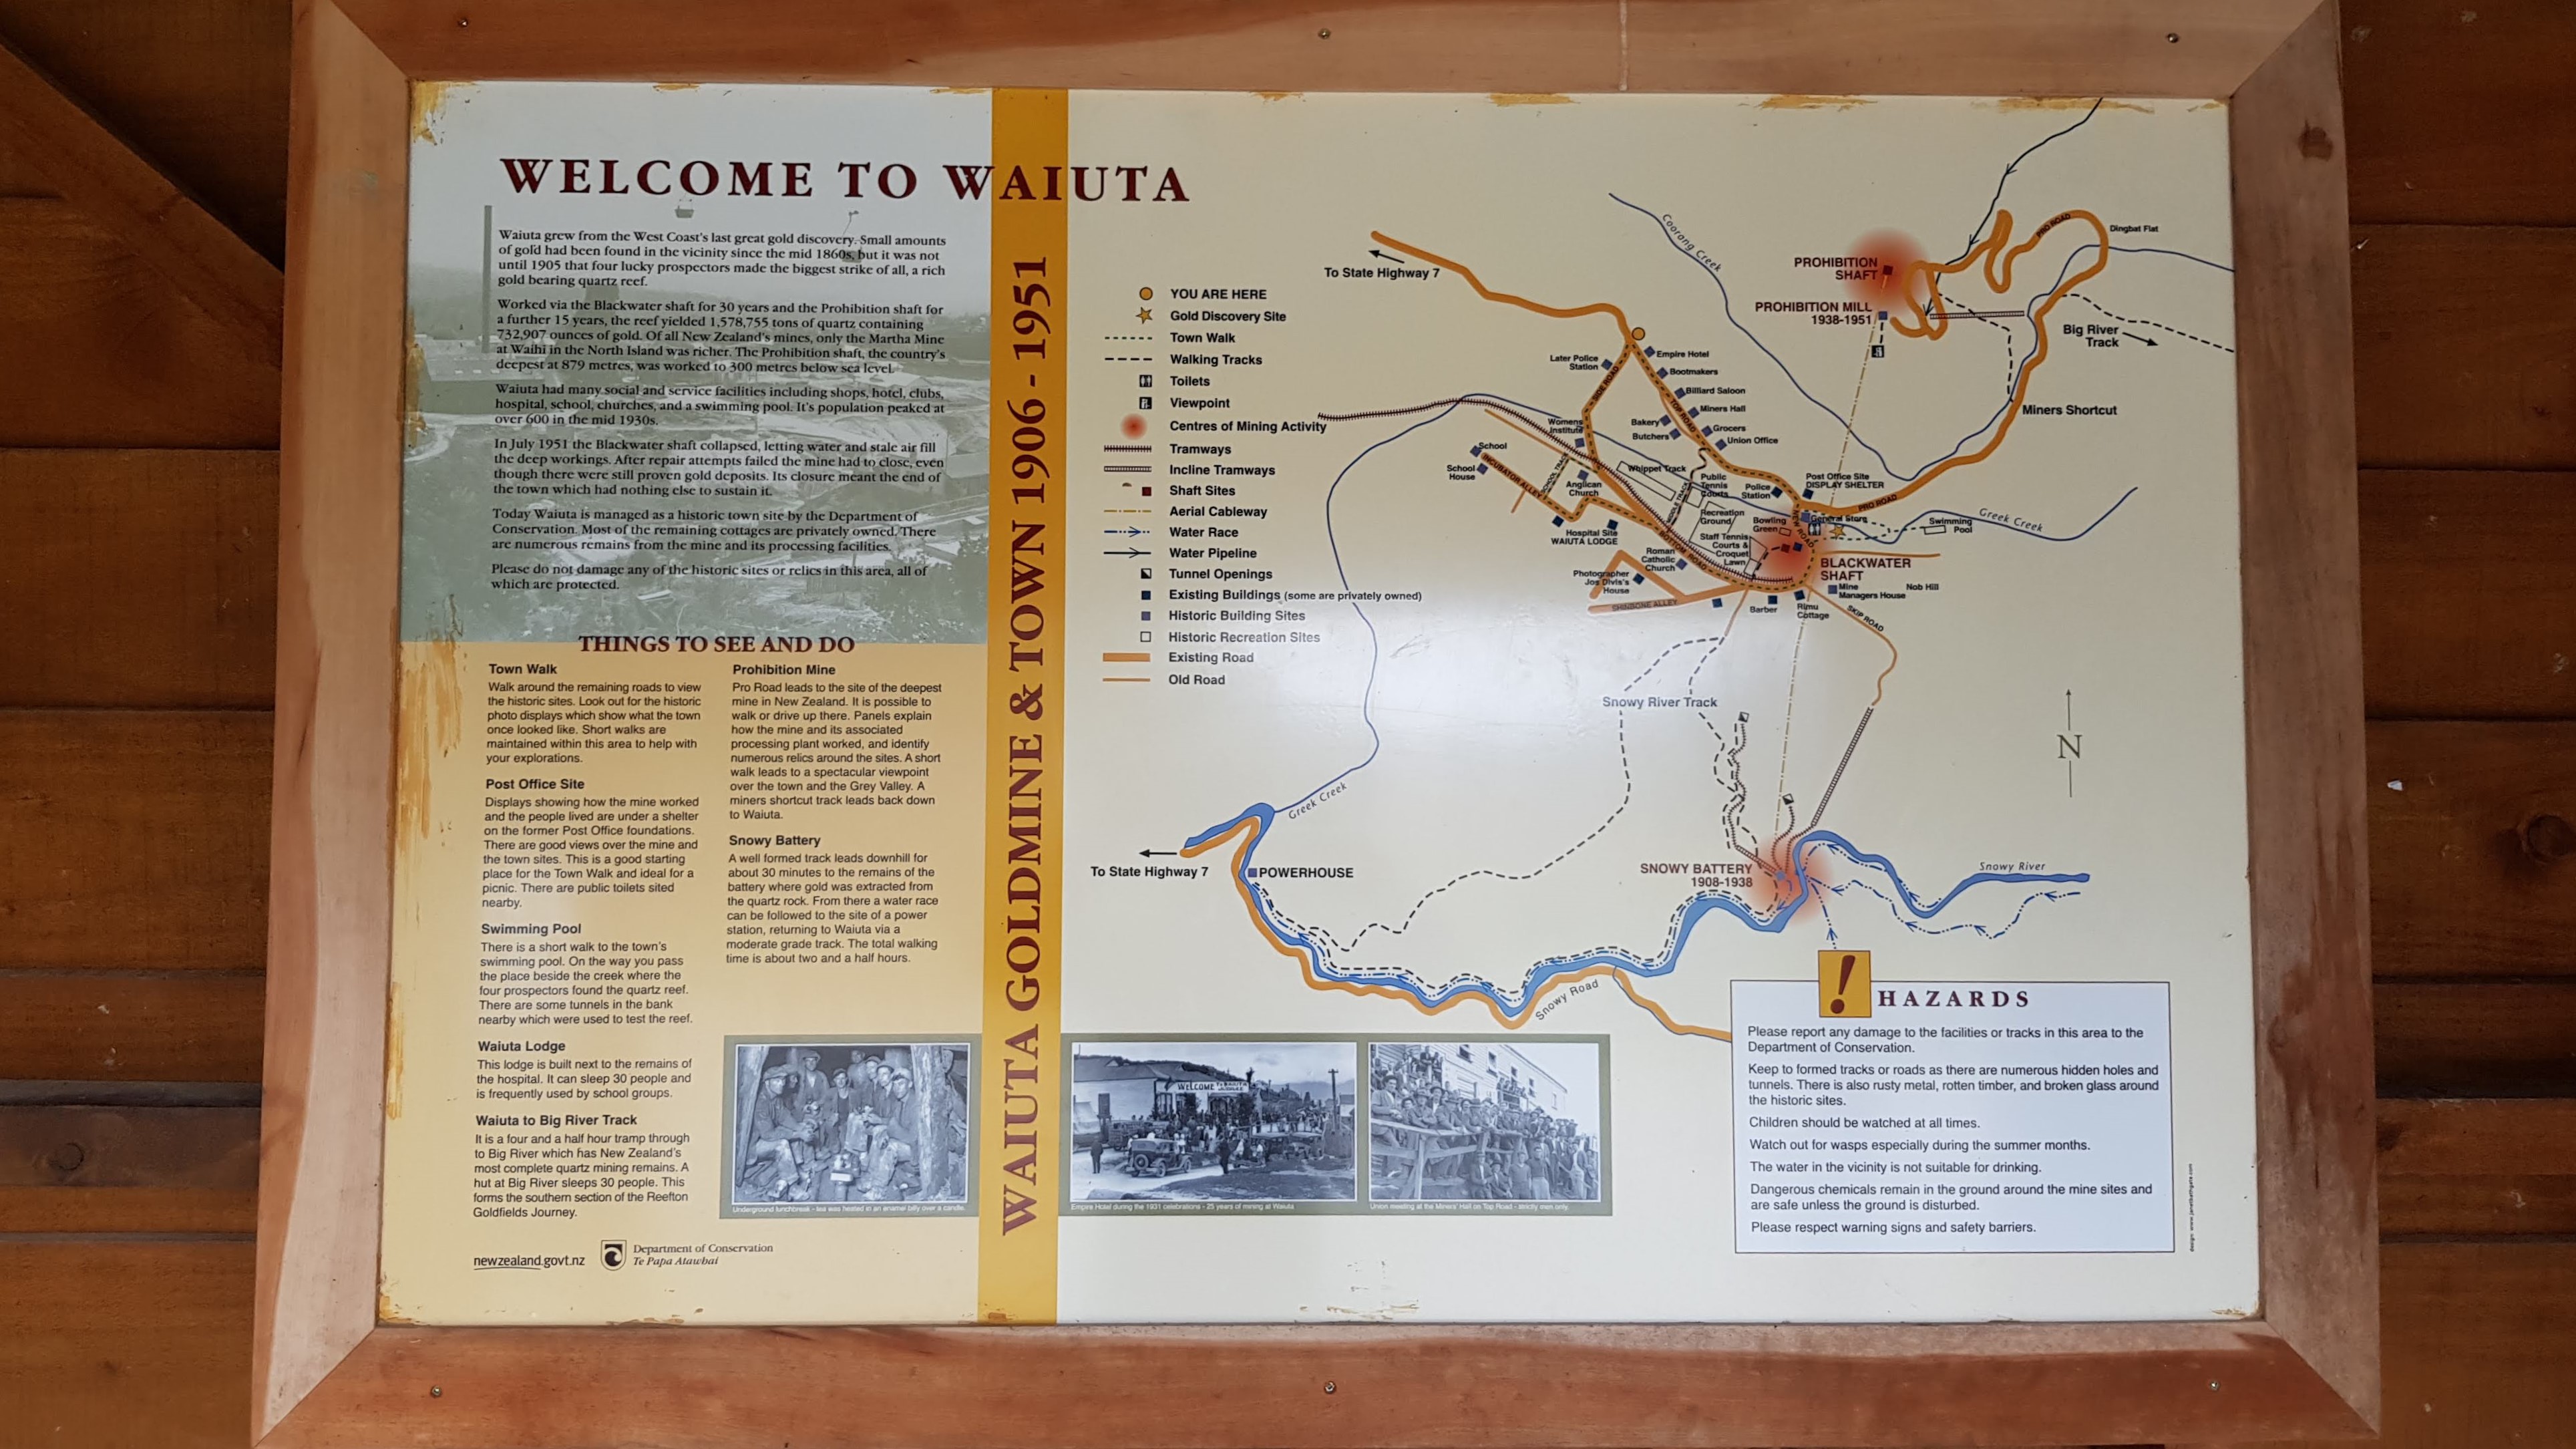 An overview of Waiuta - former gold mining town